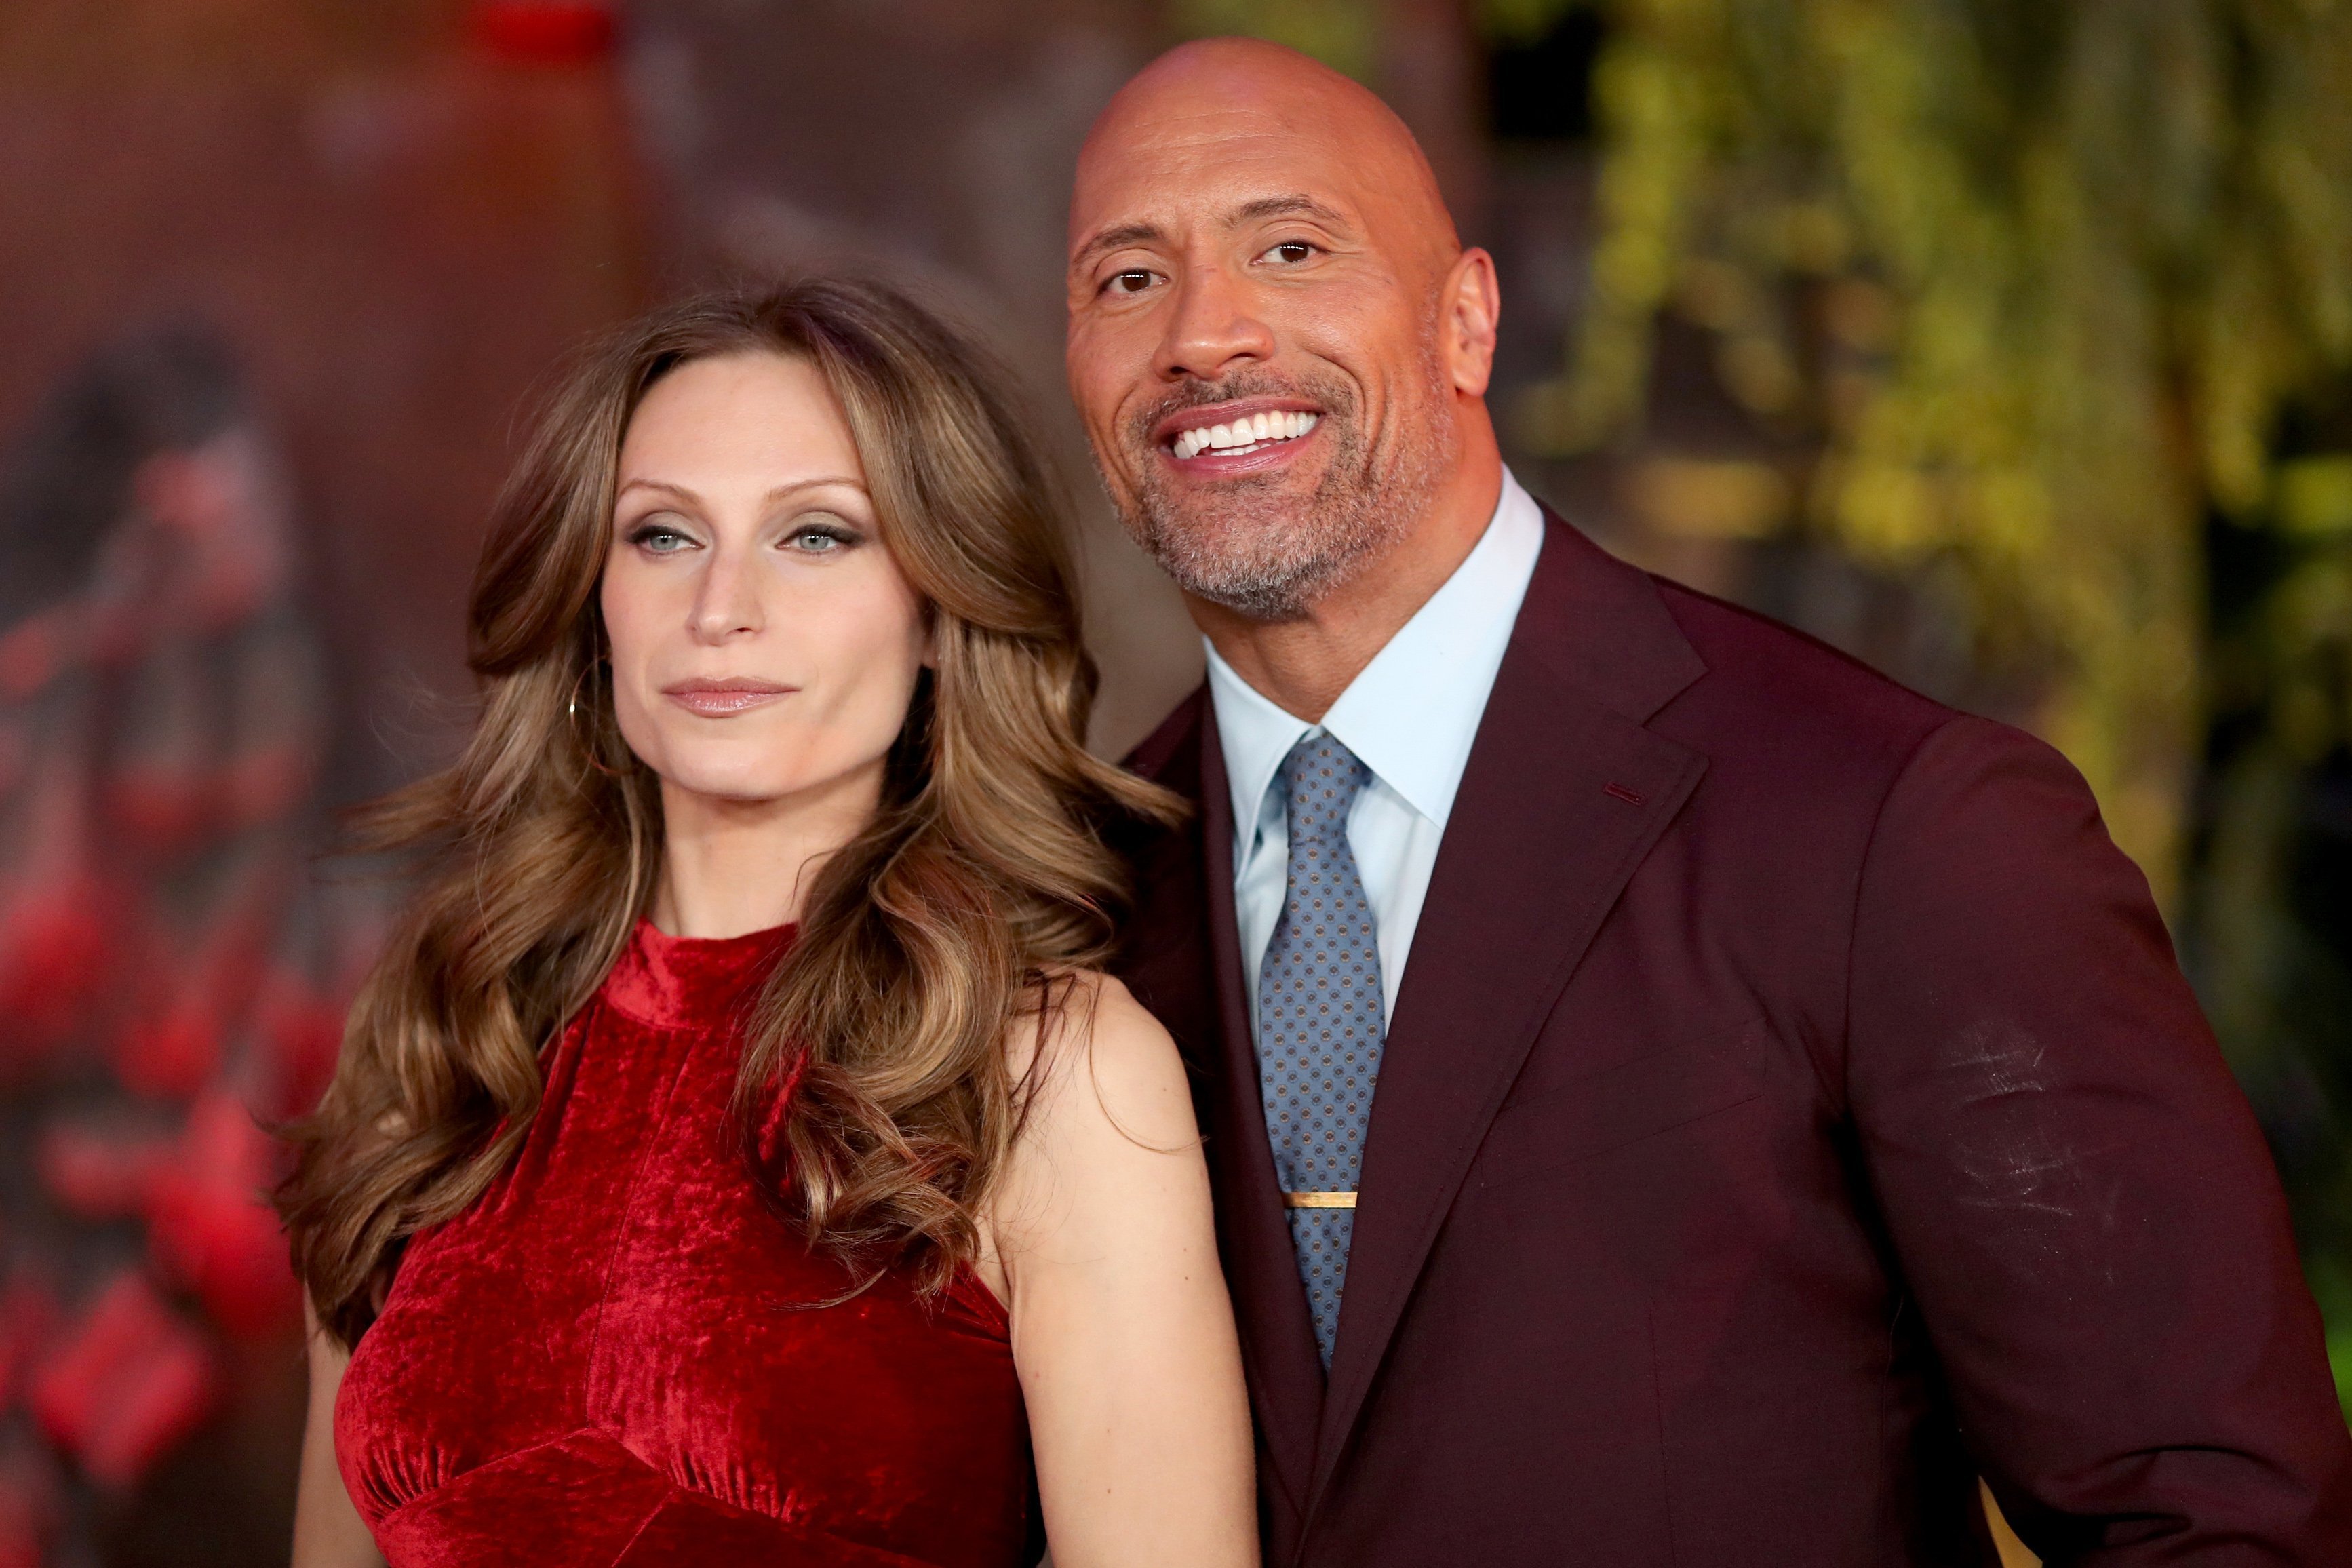 Lauren Hashian and Dwayne Johnson at the premiere of 'Jumanji: Welcome To The Jungle' on December 11, 2017 in Hollywood, California | Photo: Getty Images